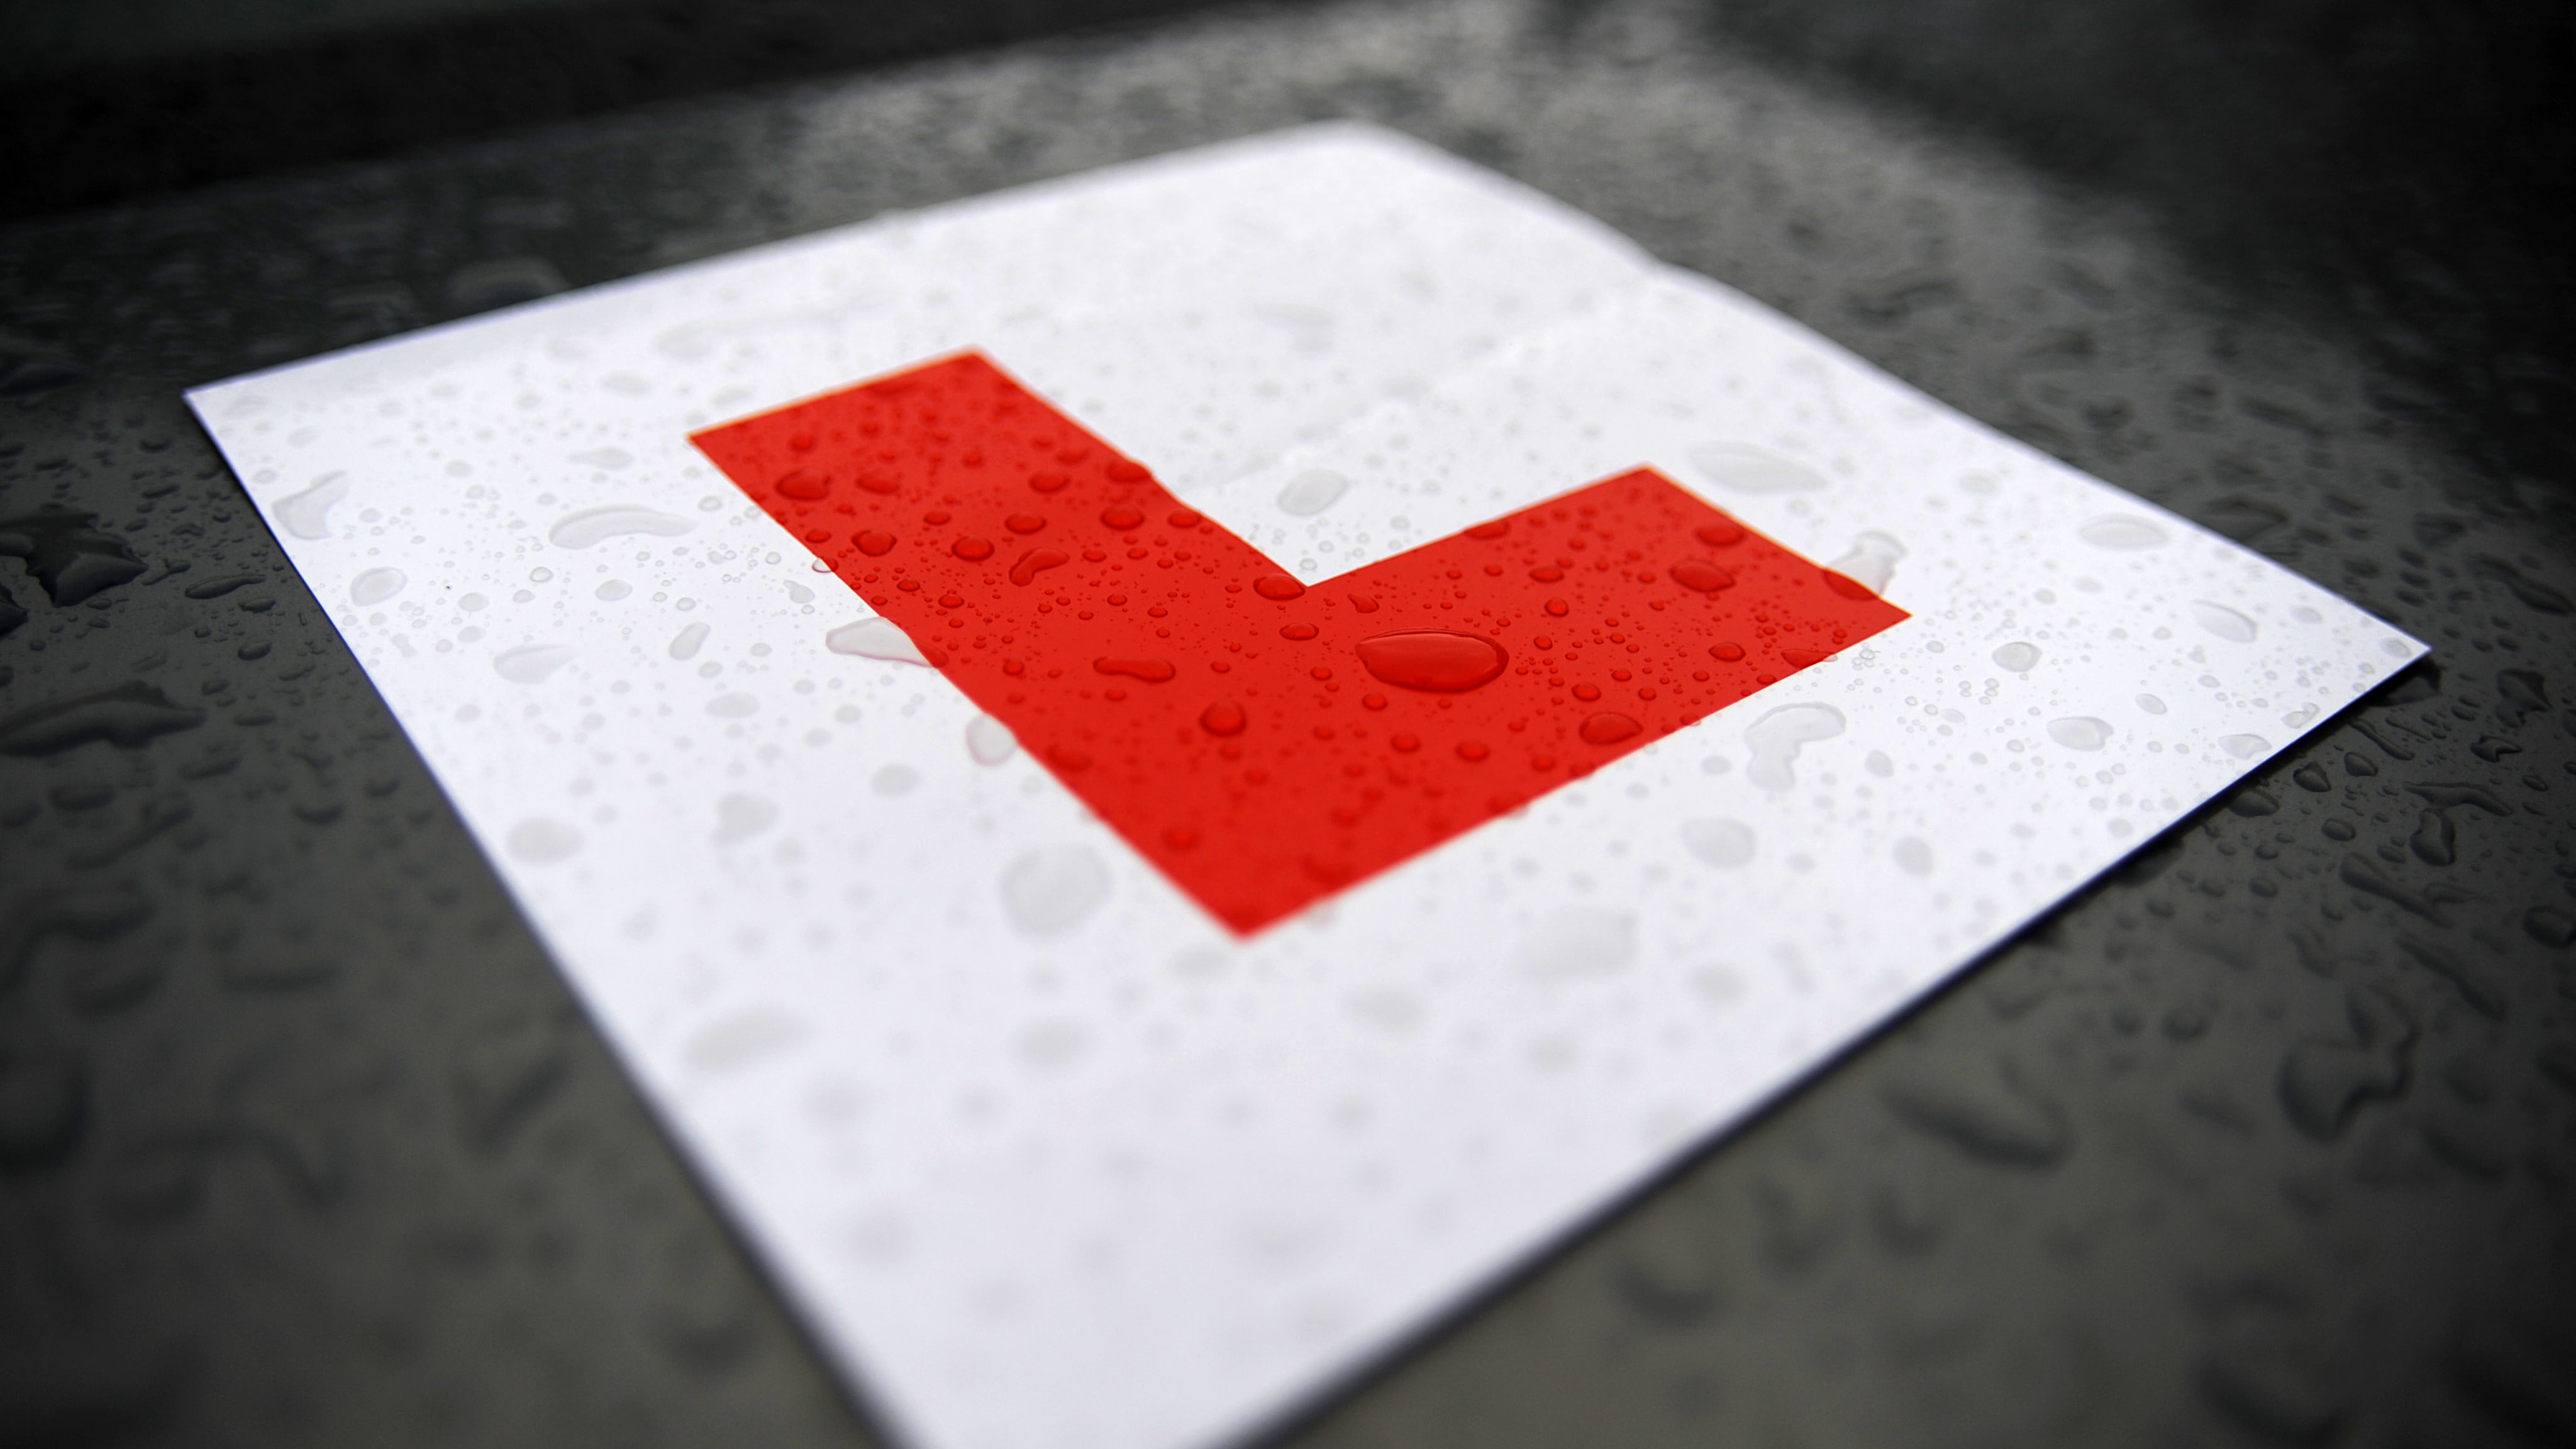 Driving test fees could be raised for learners who have already made multiple unsuccessful attempts, a motoring research charity has suggested